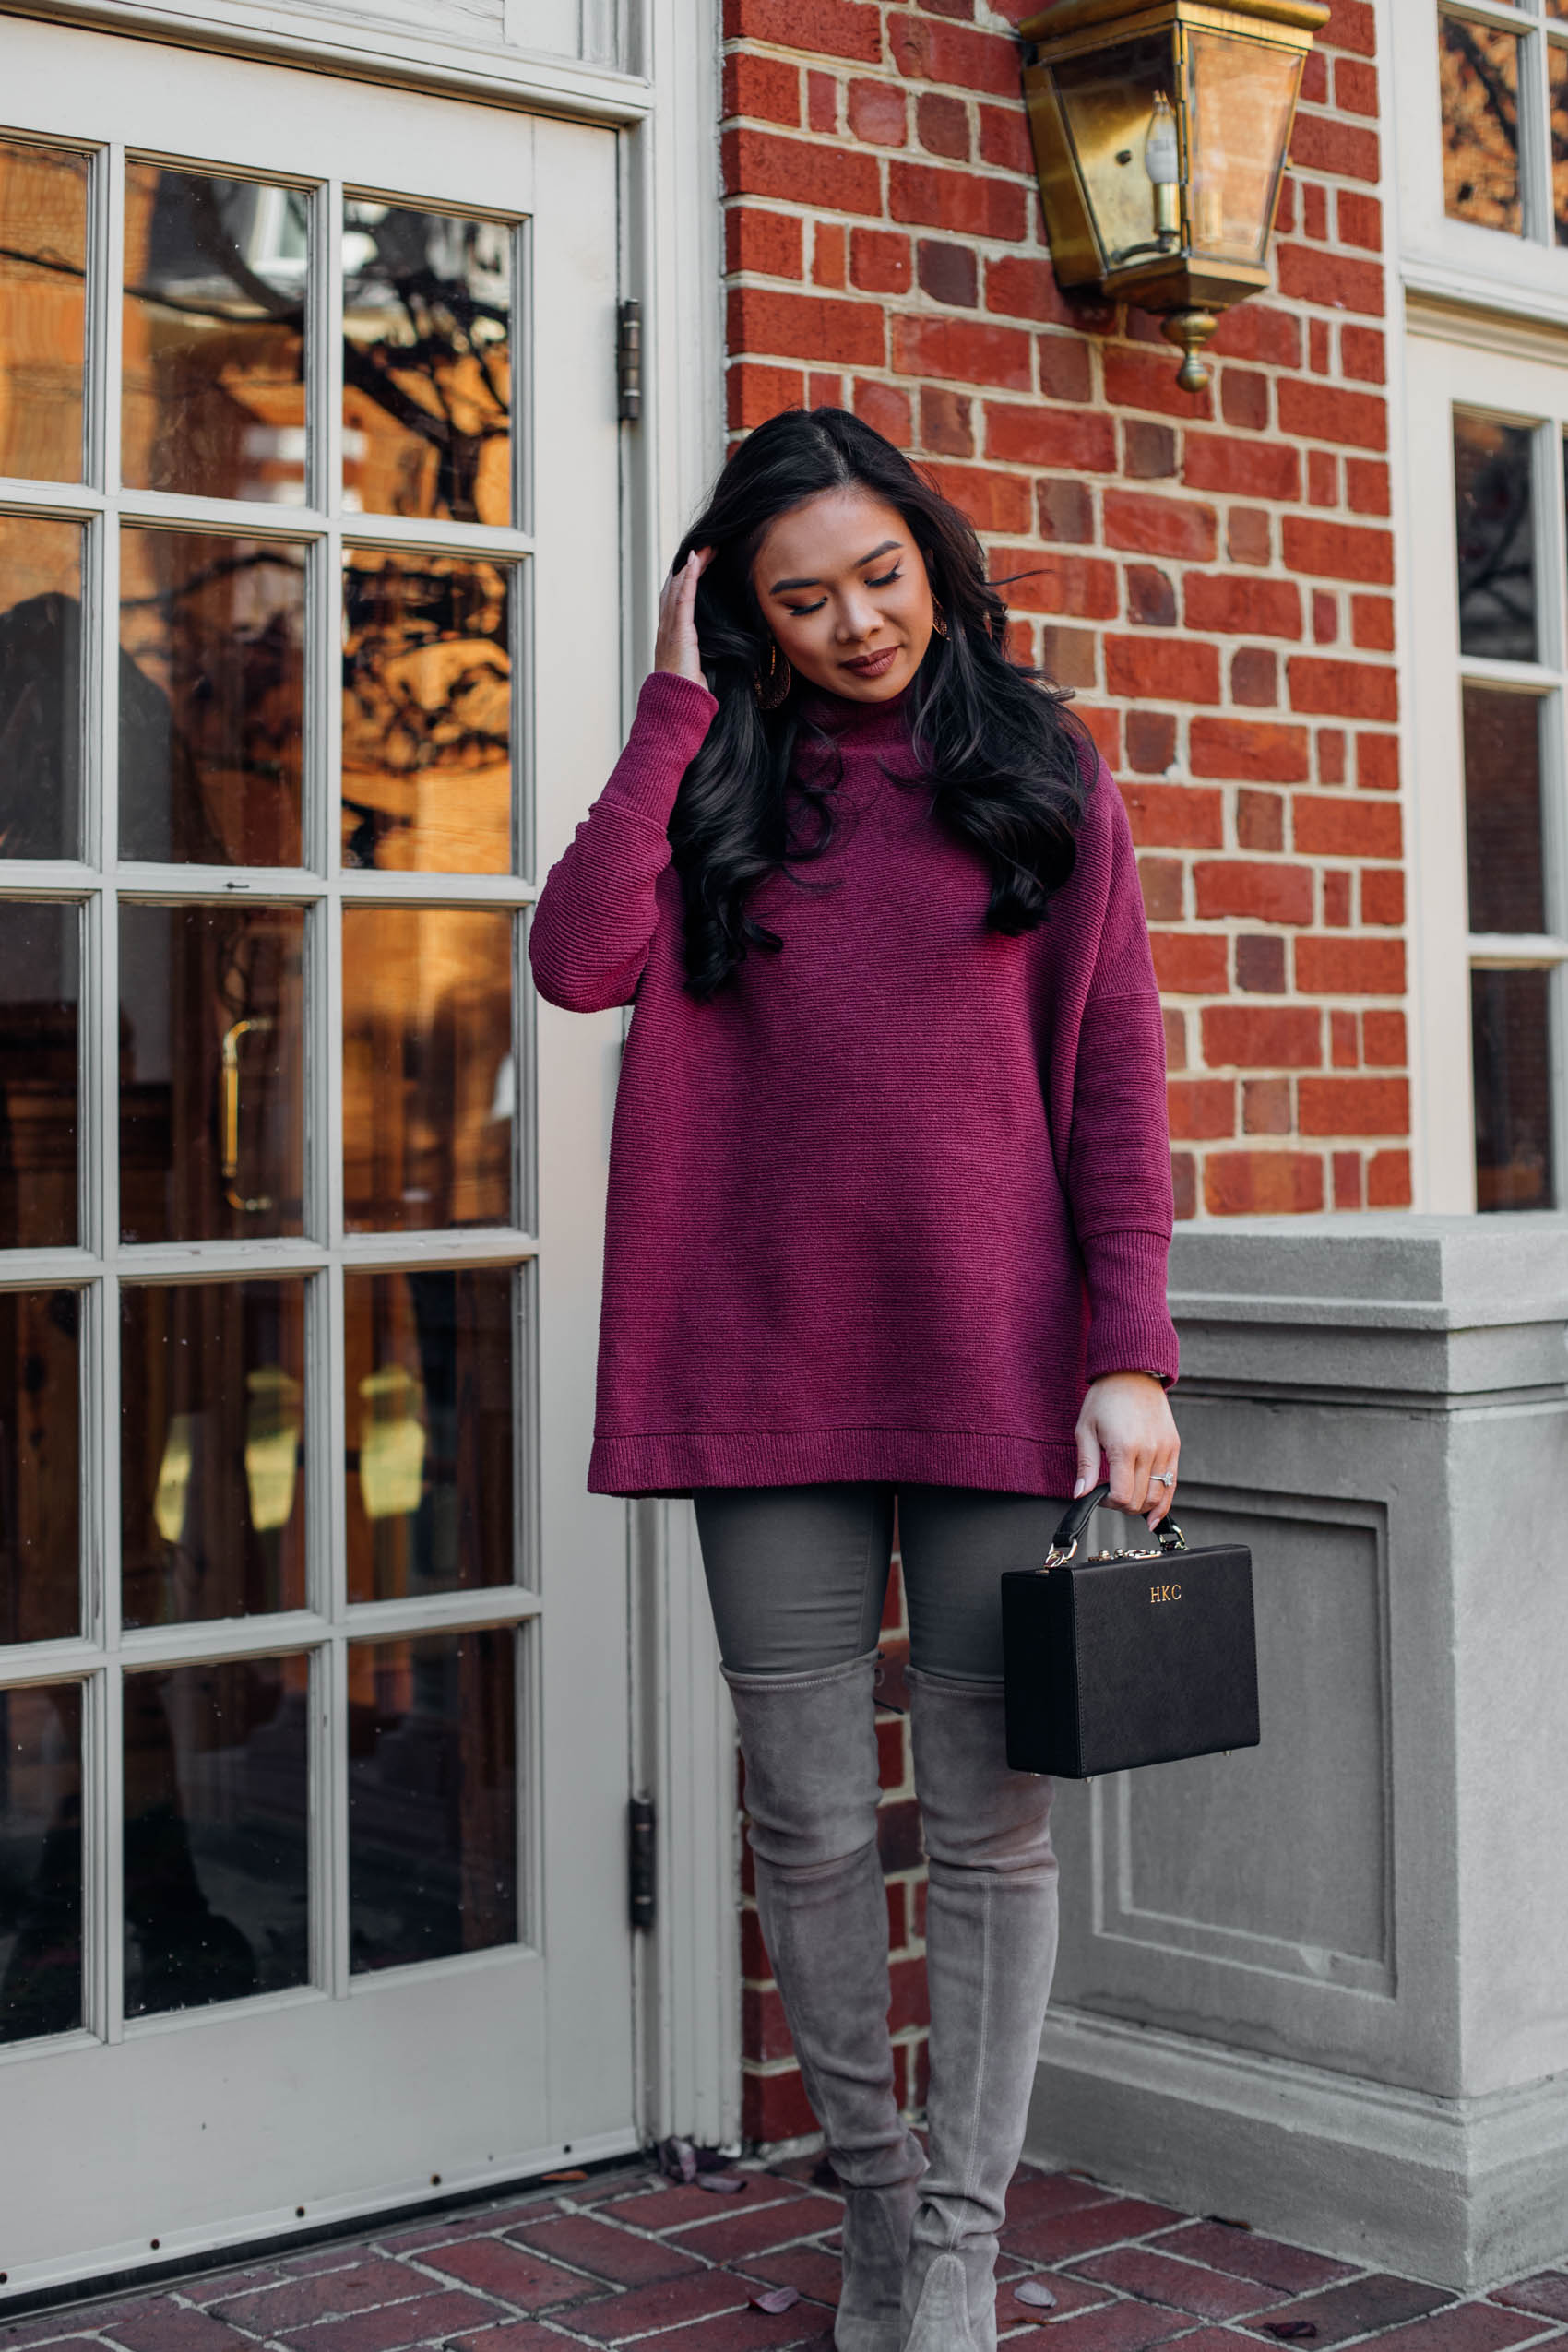 Blogger Hoang-Kim wears a oversized tunic sweater with gray over the knee boots and a black box bag